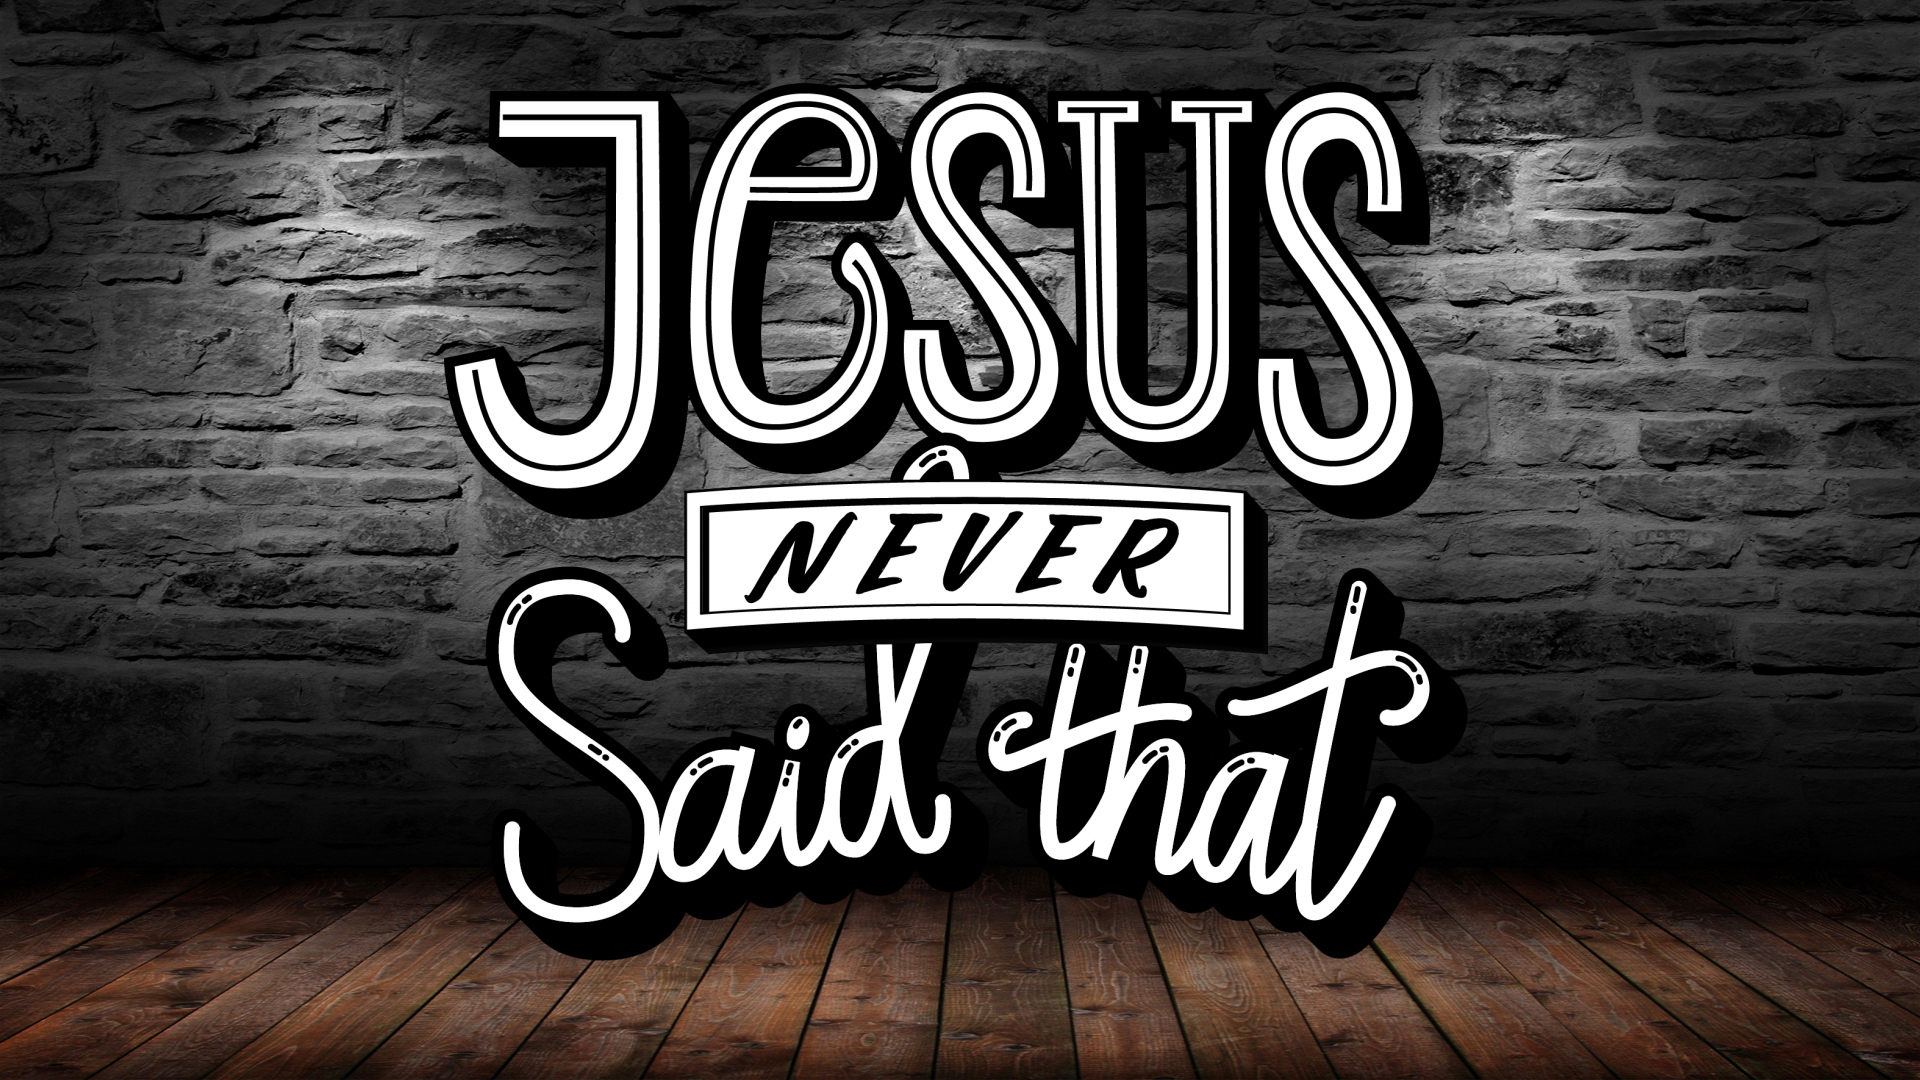 Things Jesus never said: “This wouldn’t be happening     				  if you were a better Christian”